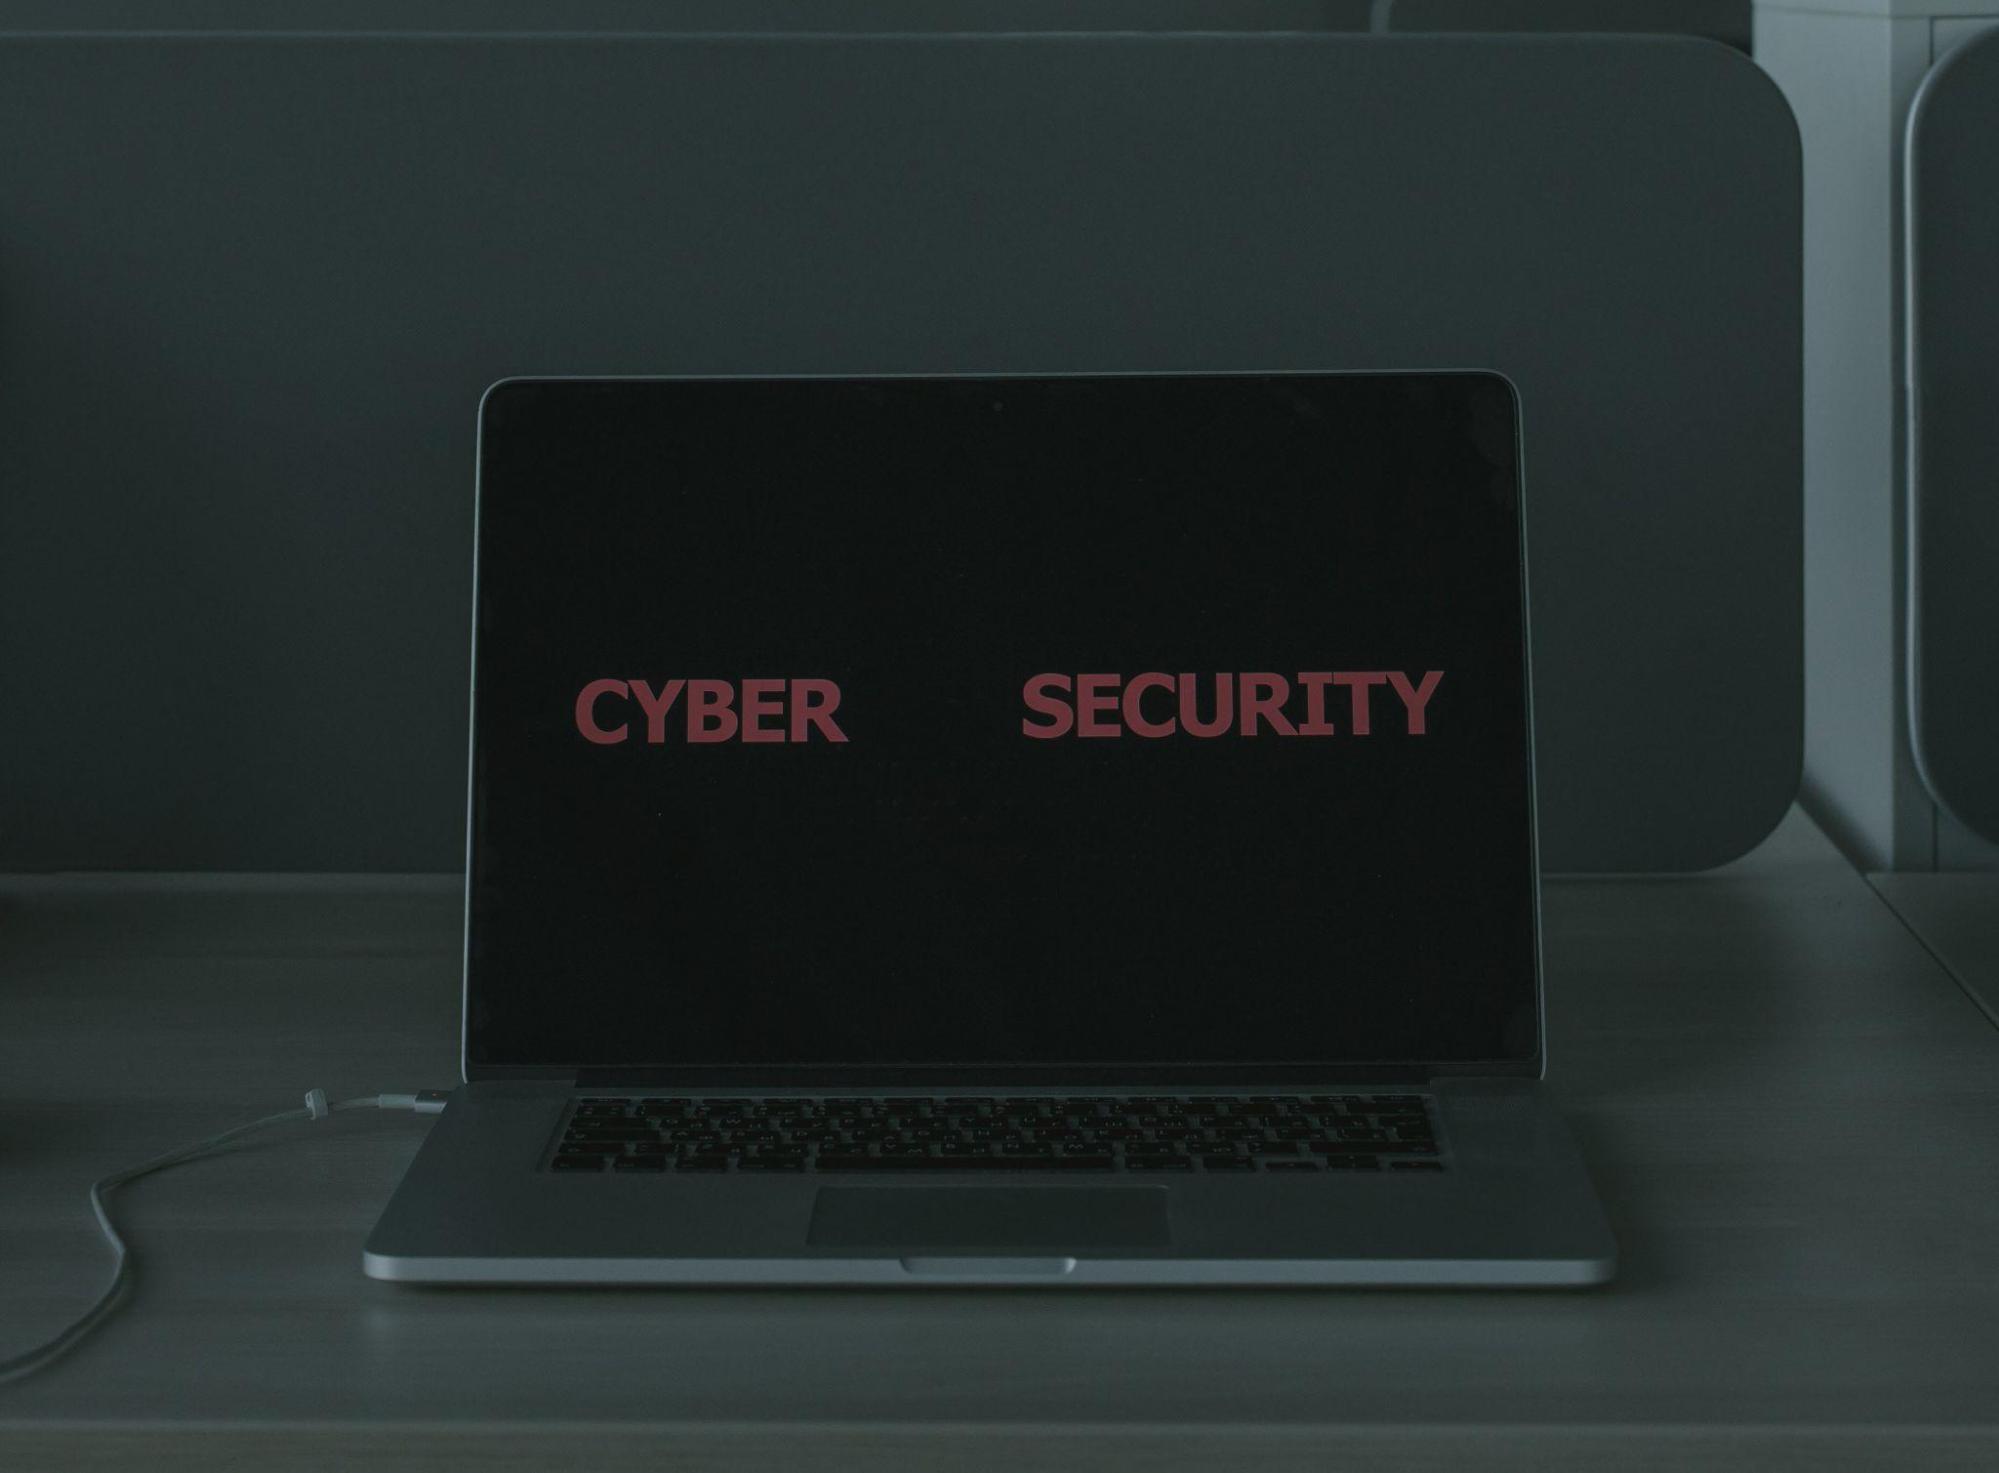 Cyber Security: Spam, Scams, Frauds, and Identity Theft